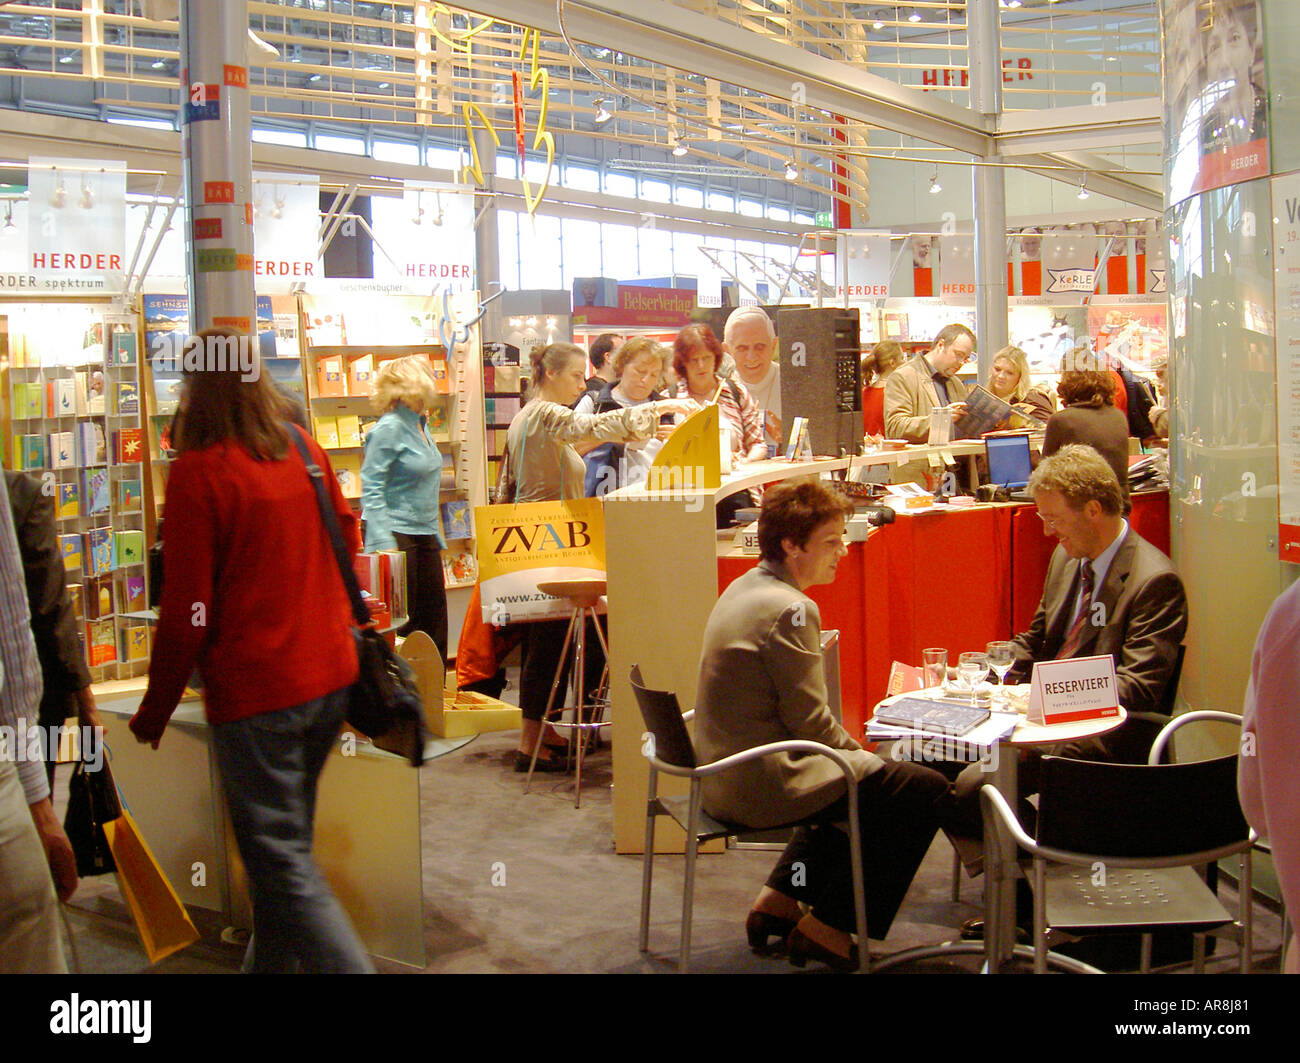 Frankfurt International Book Fair Buchmesse showing German publishers exhibition stands and visitors Stock Photo